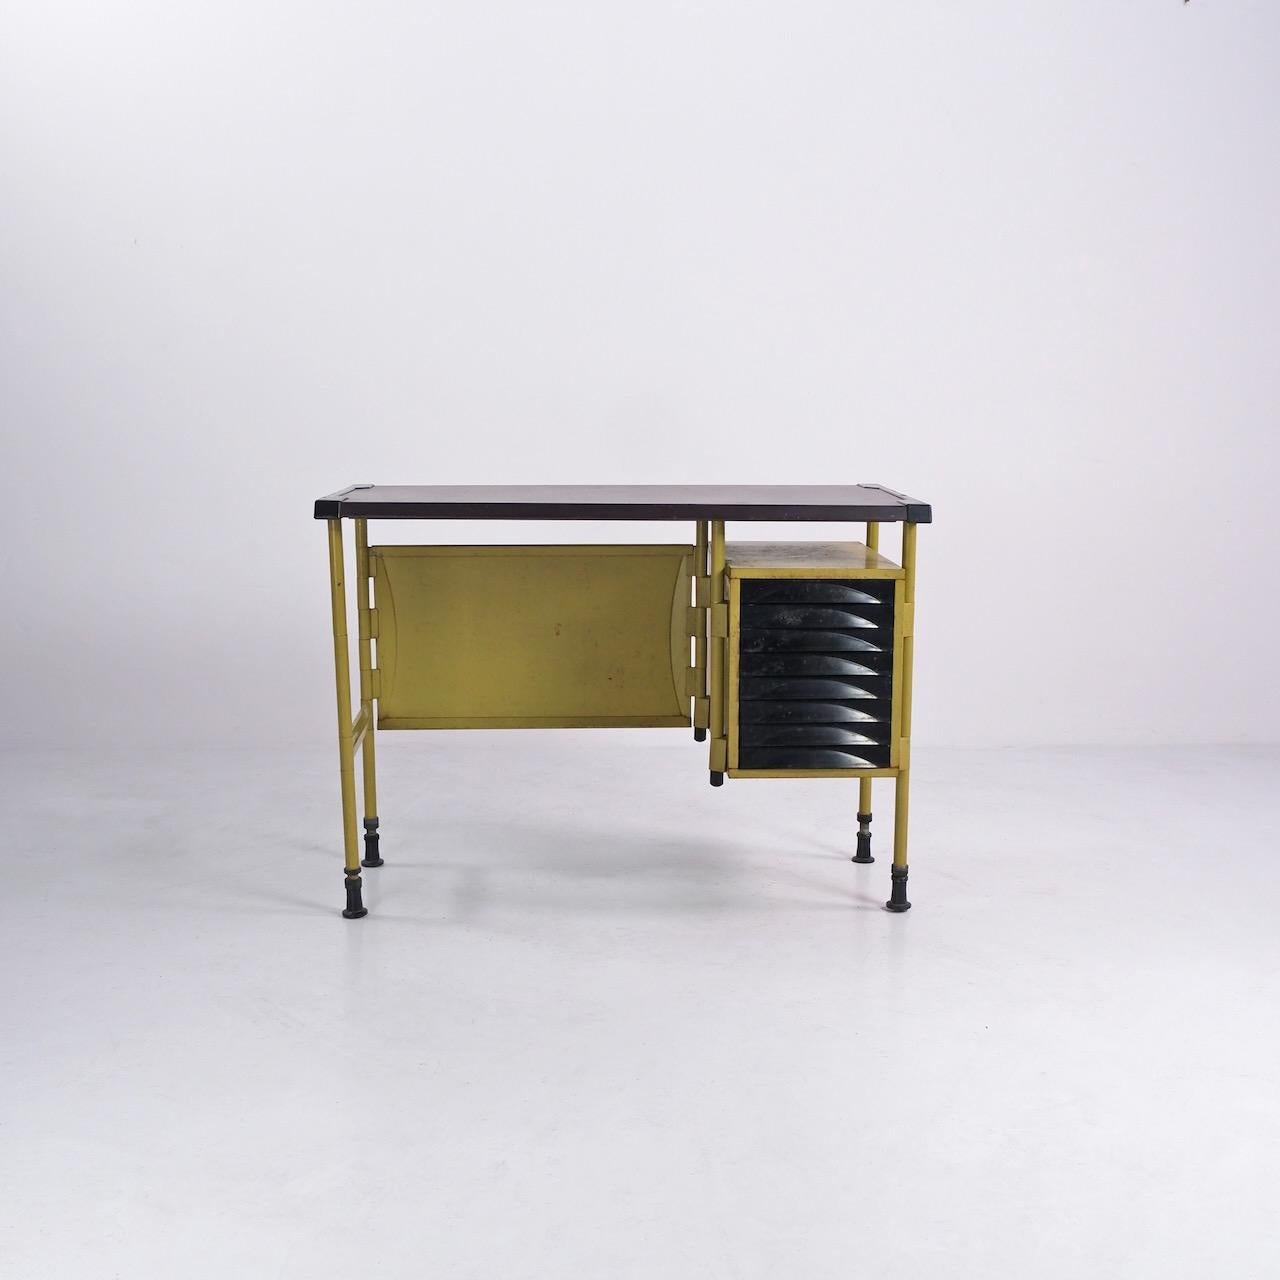 Industrial Compact Spazio Desk by BBPR Architects / Olivetti Synthesis, Italy, c.1960